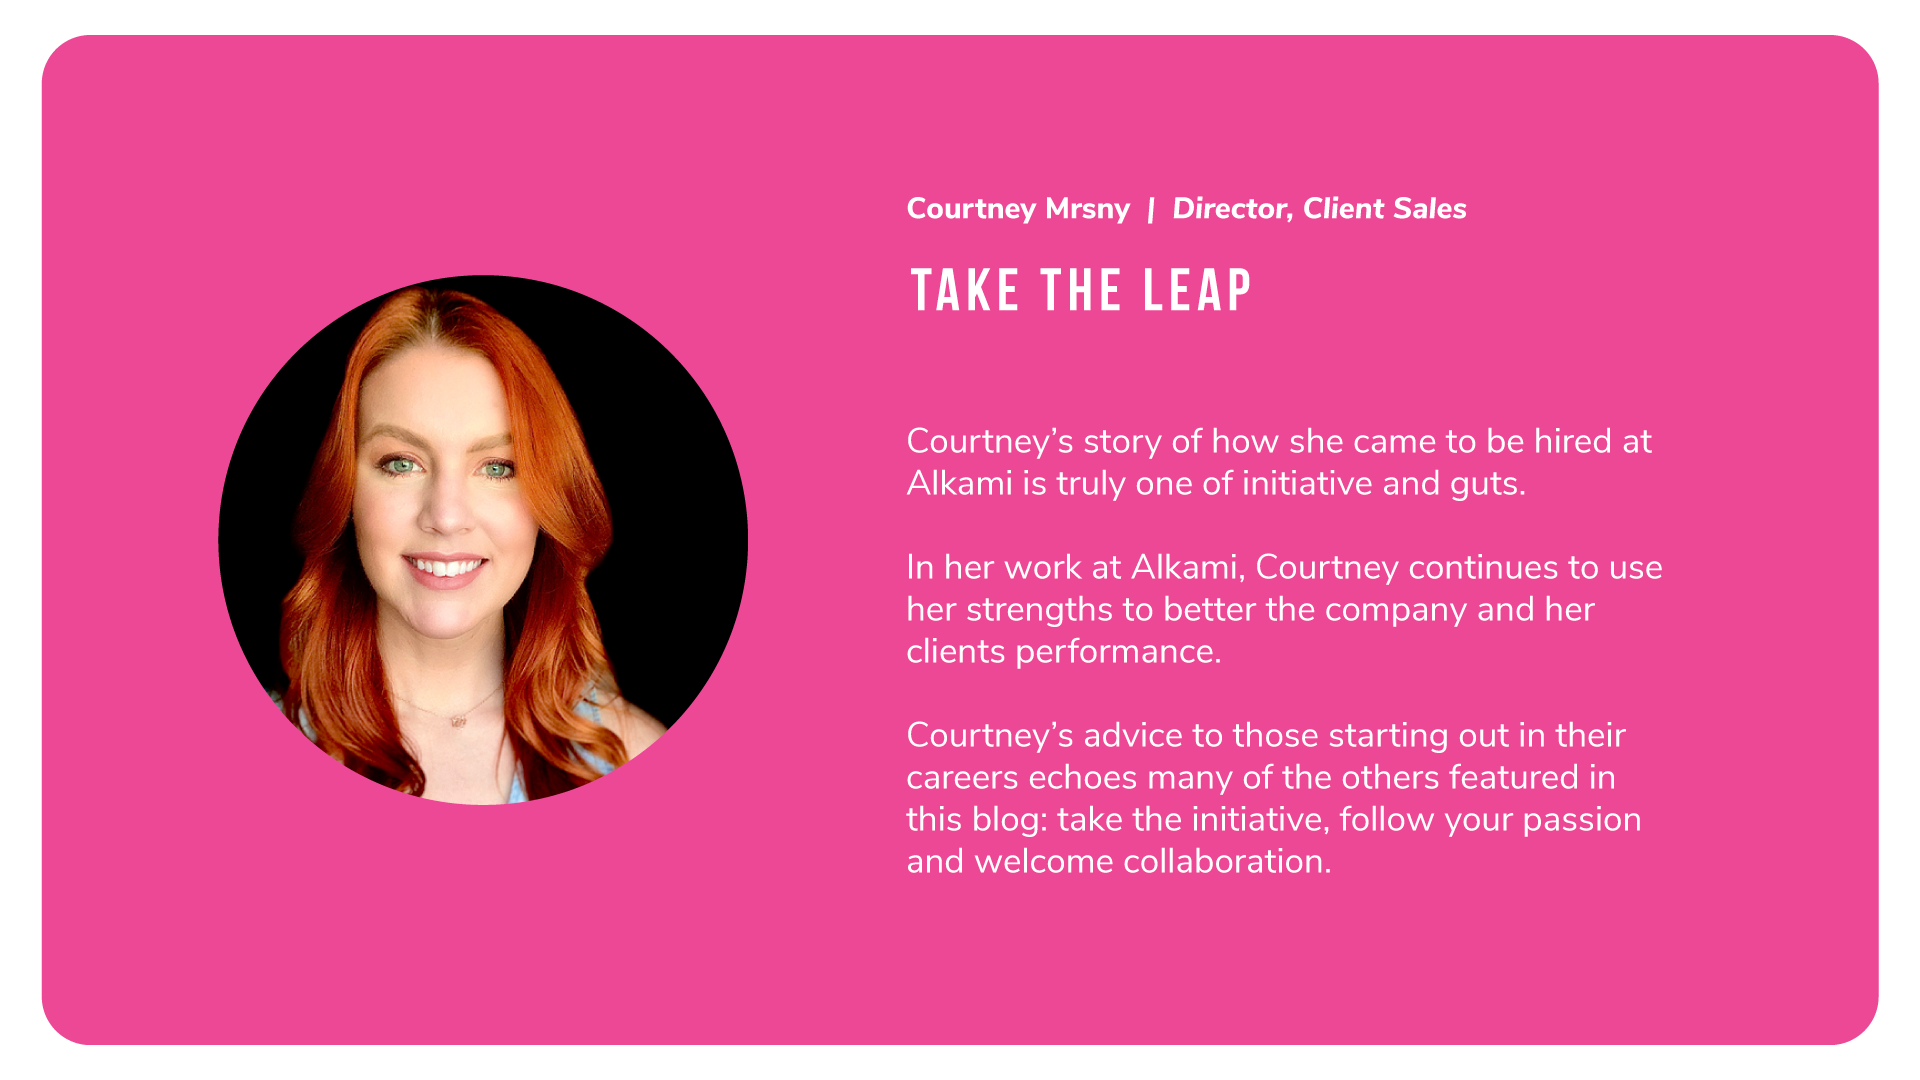 Courtney Mrsny of Alkami says: Take the leap